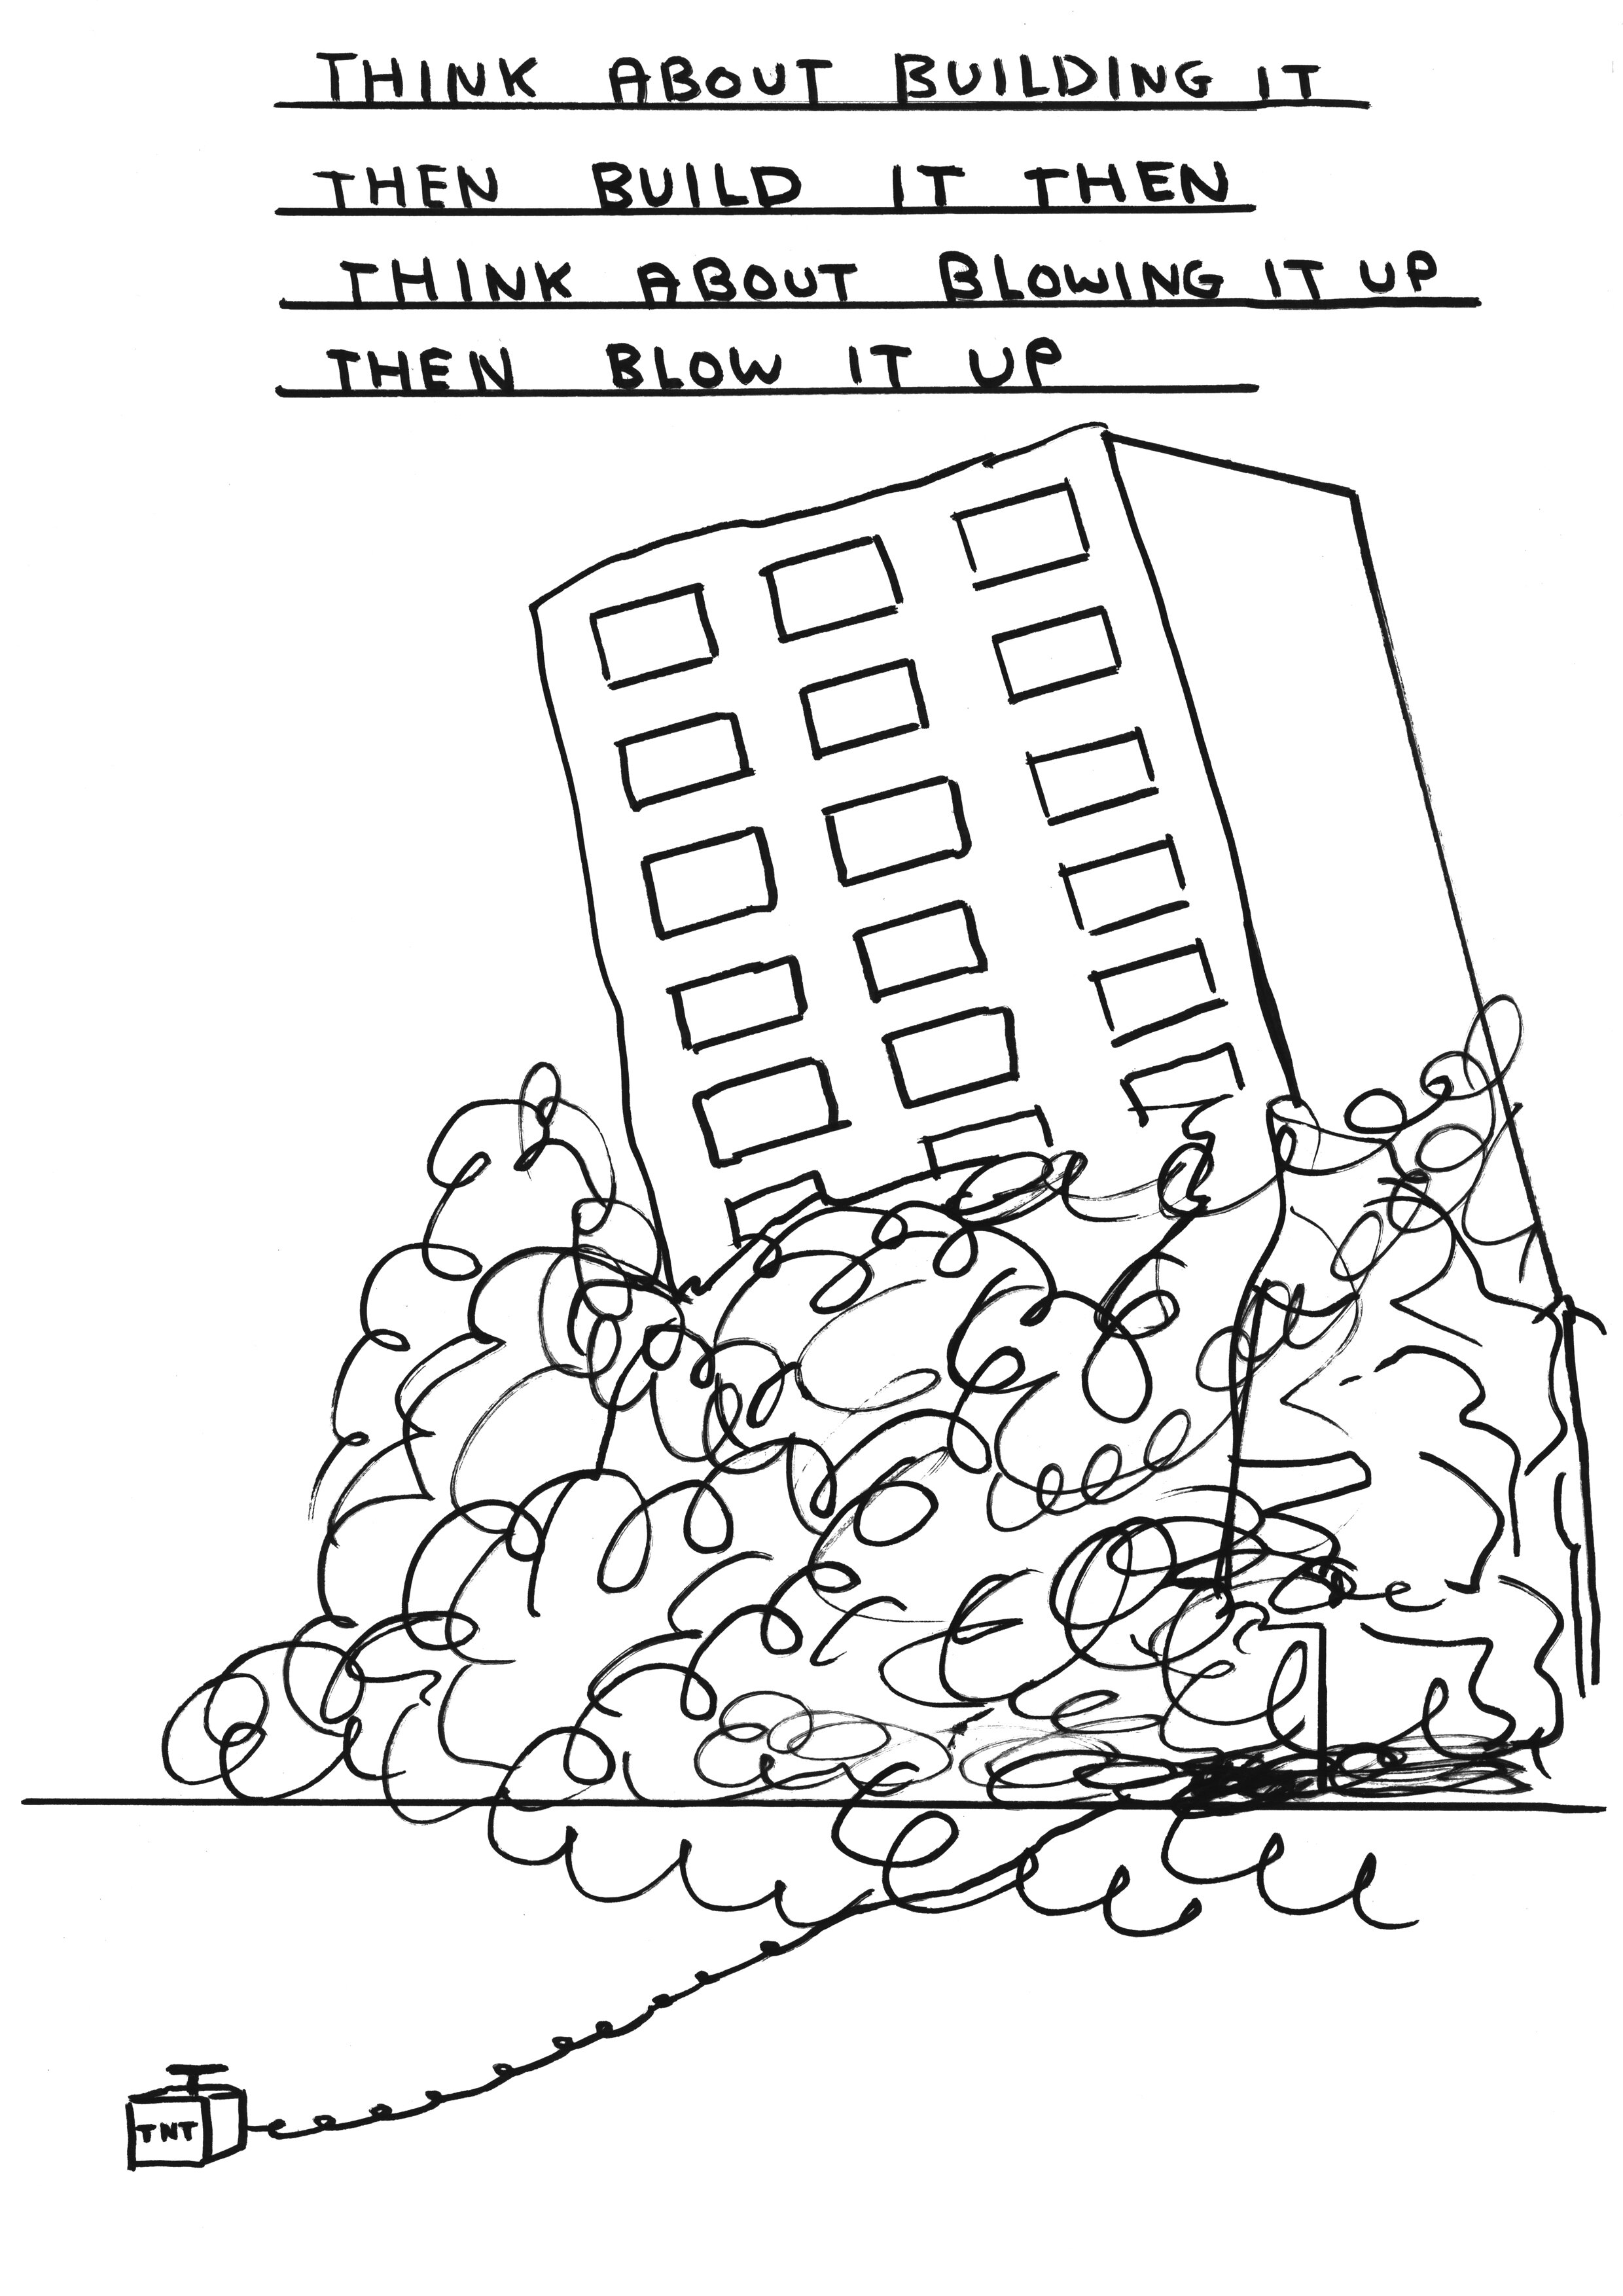 David Shrigley, Untitled (Think about building it), 2010, drawing on paper